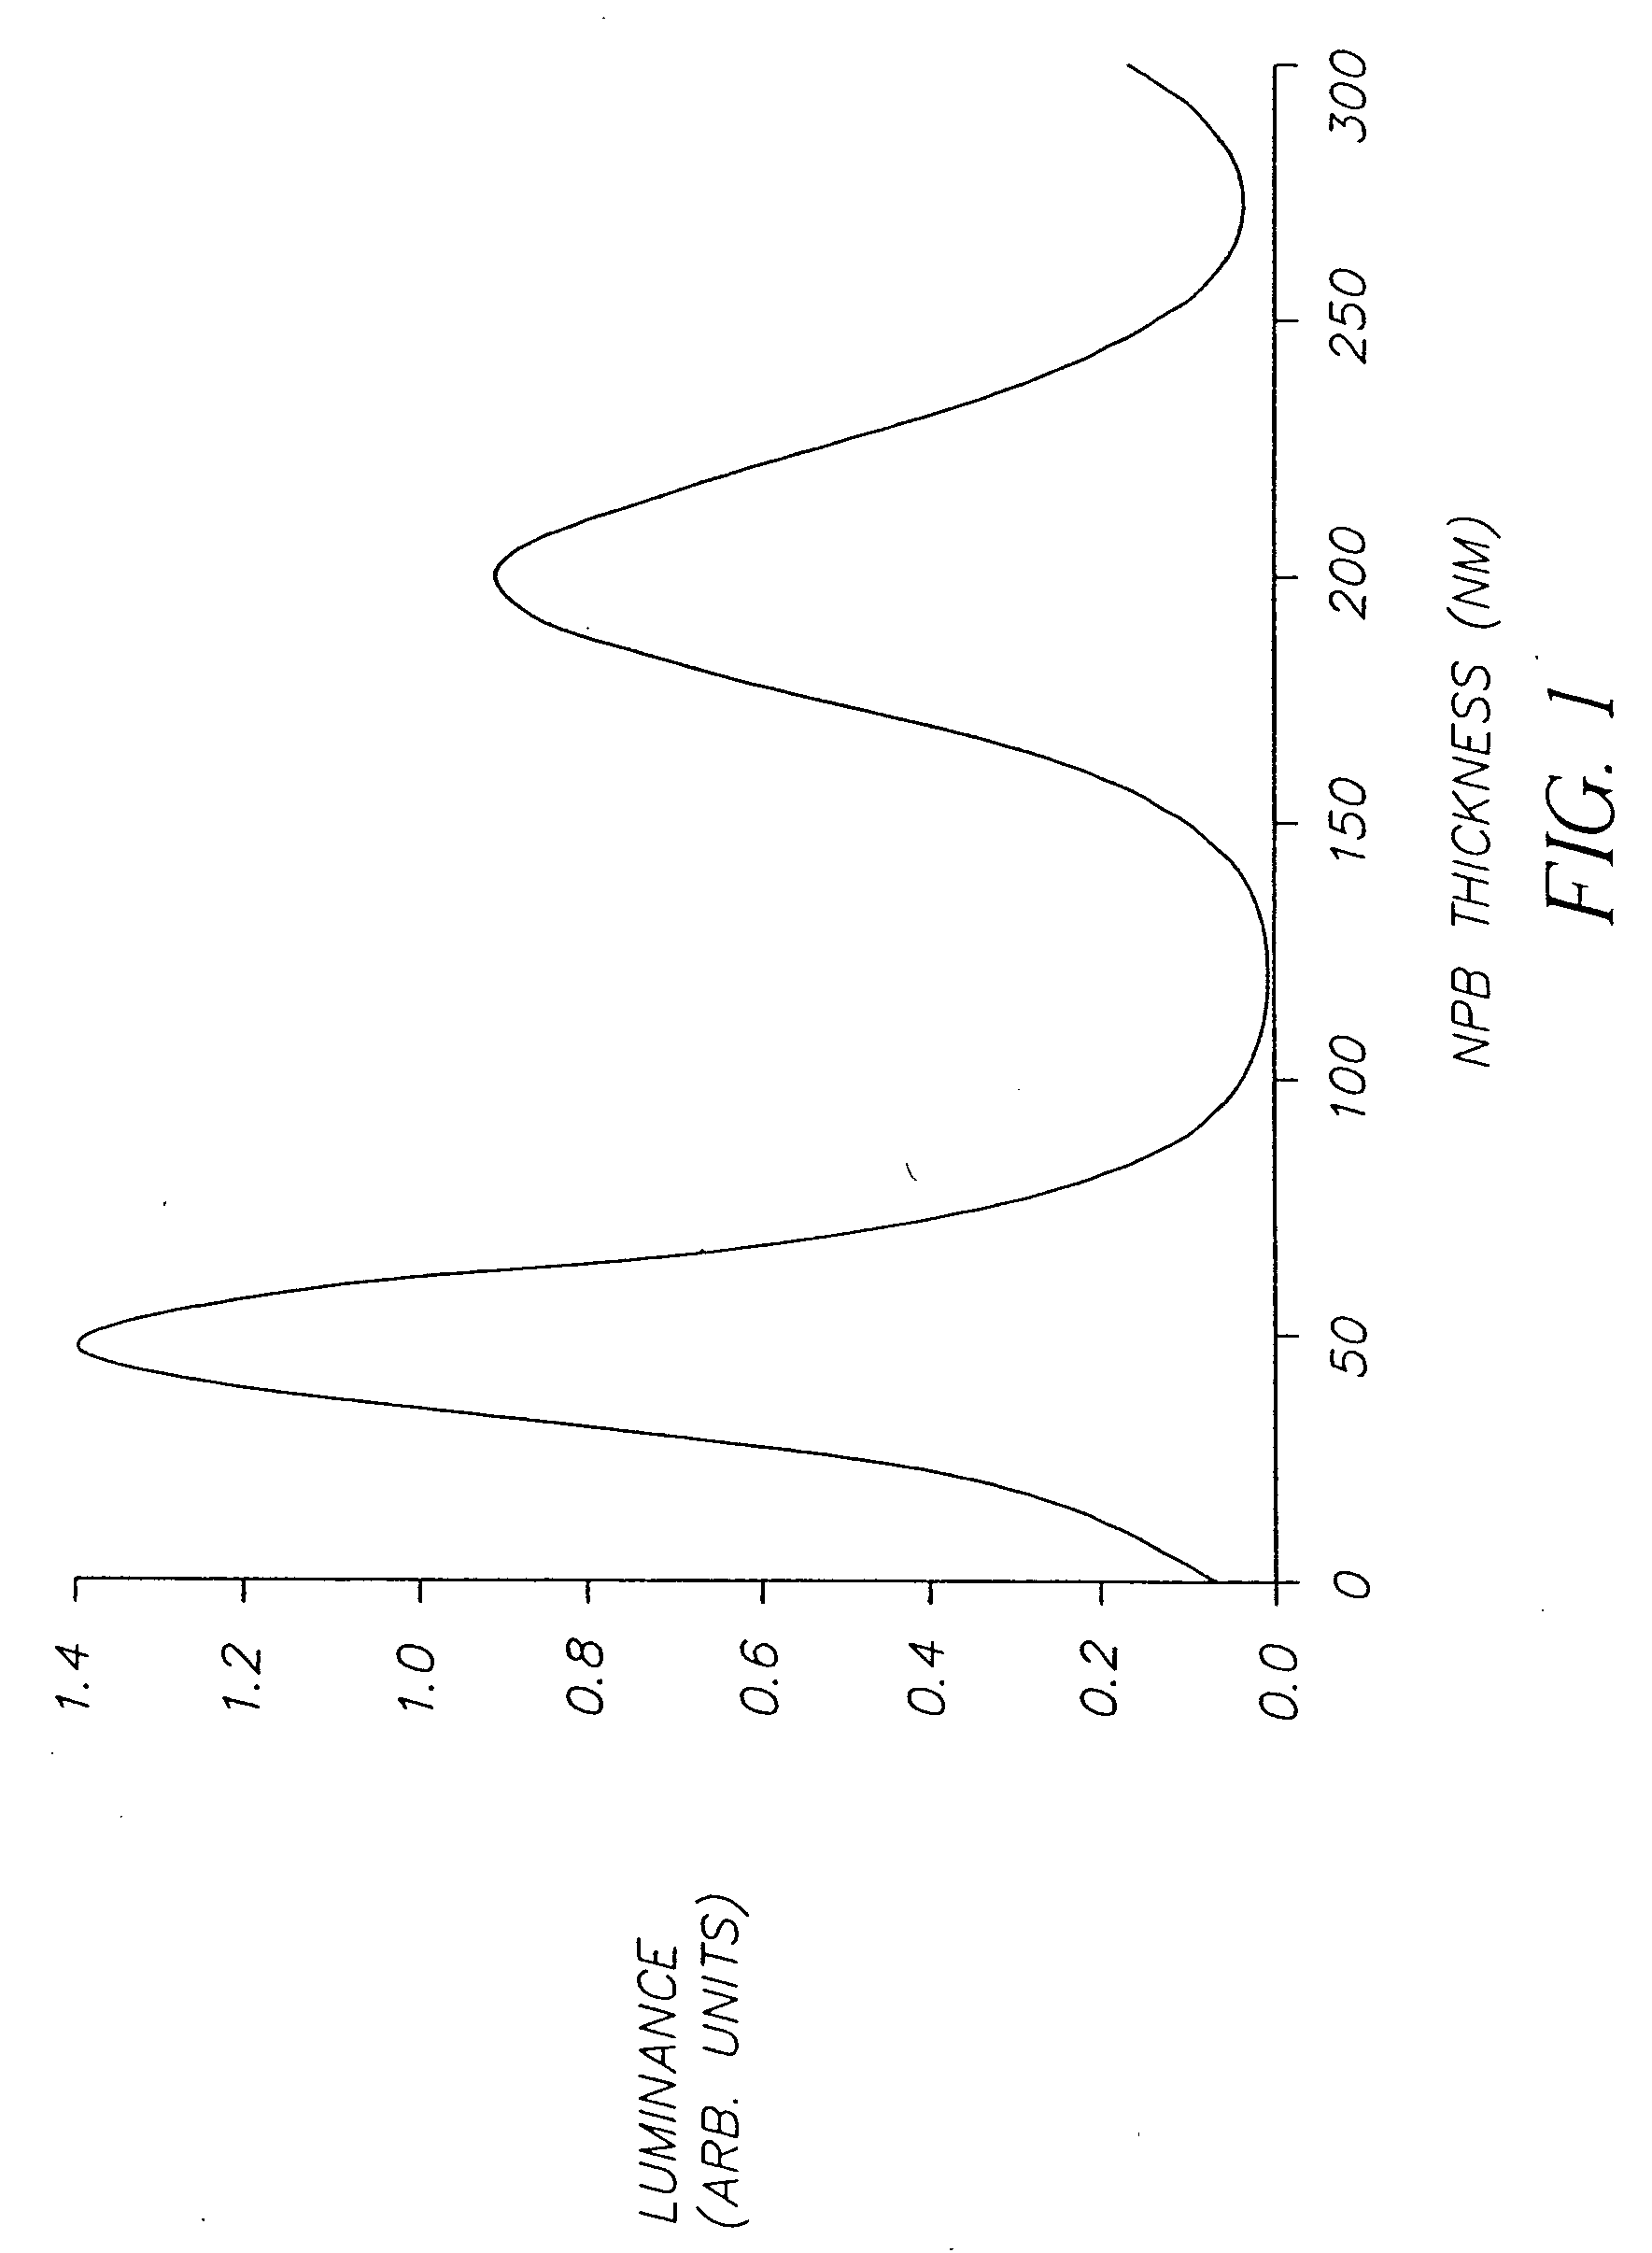 Organic light emitting diode with improved light emission through the cathode